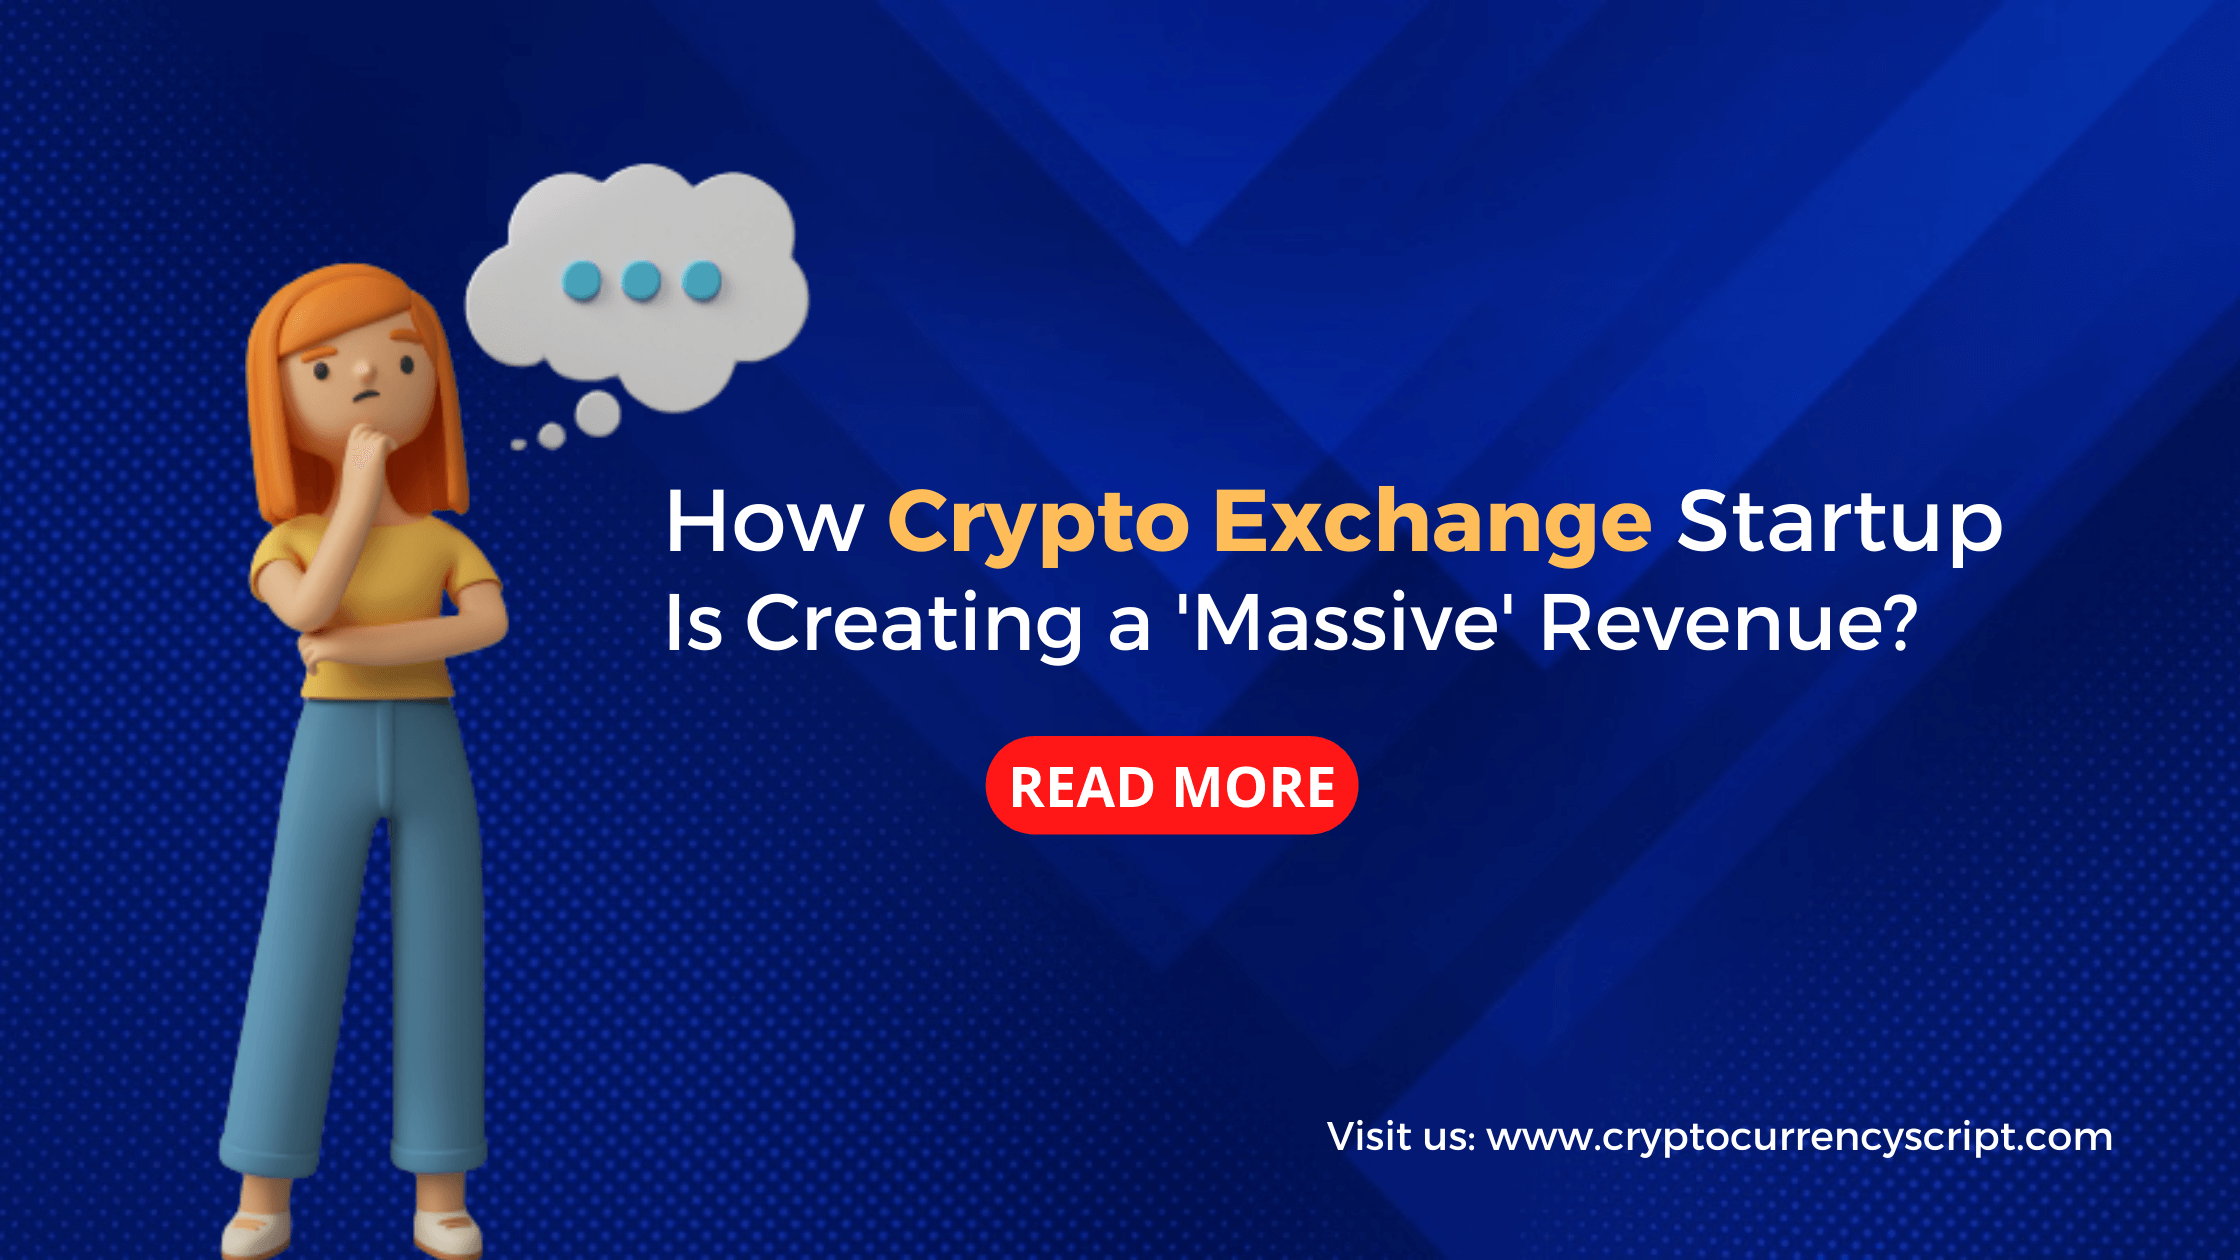 How Cryptocurrency Exchange Startup Is Creating a ‘Massive’ Revenue?